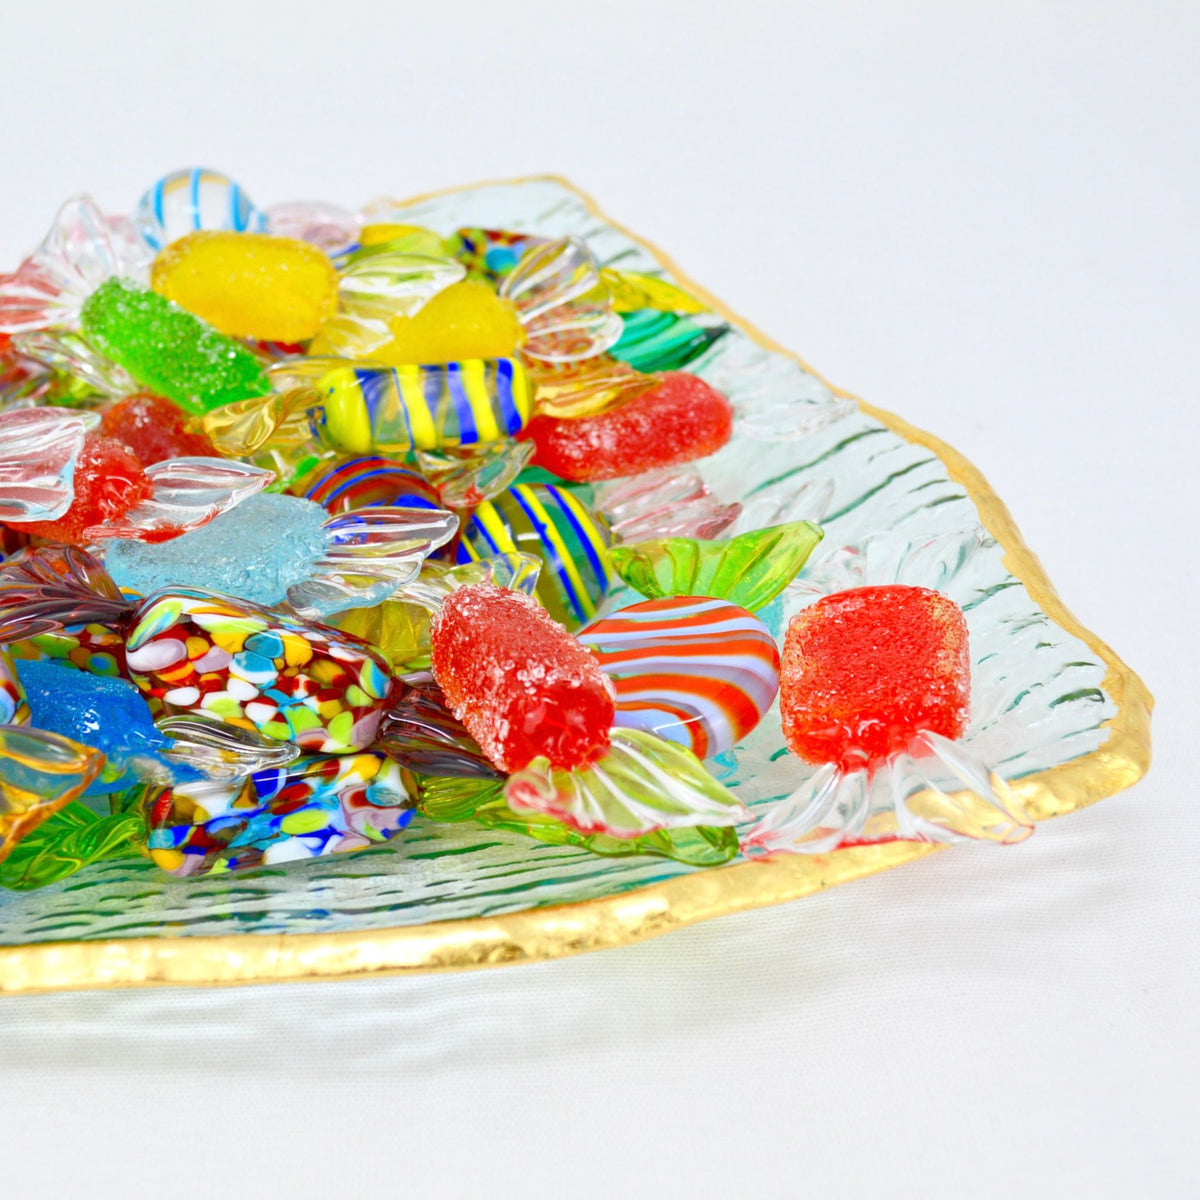 Murano Glass Candy, Classic, Set of 3, 5, or 10 Candies, Decorative Glass Sweets - My Italian Decor